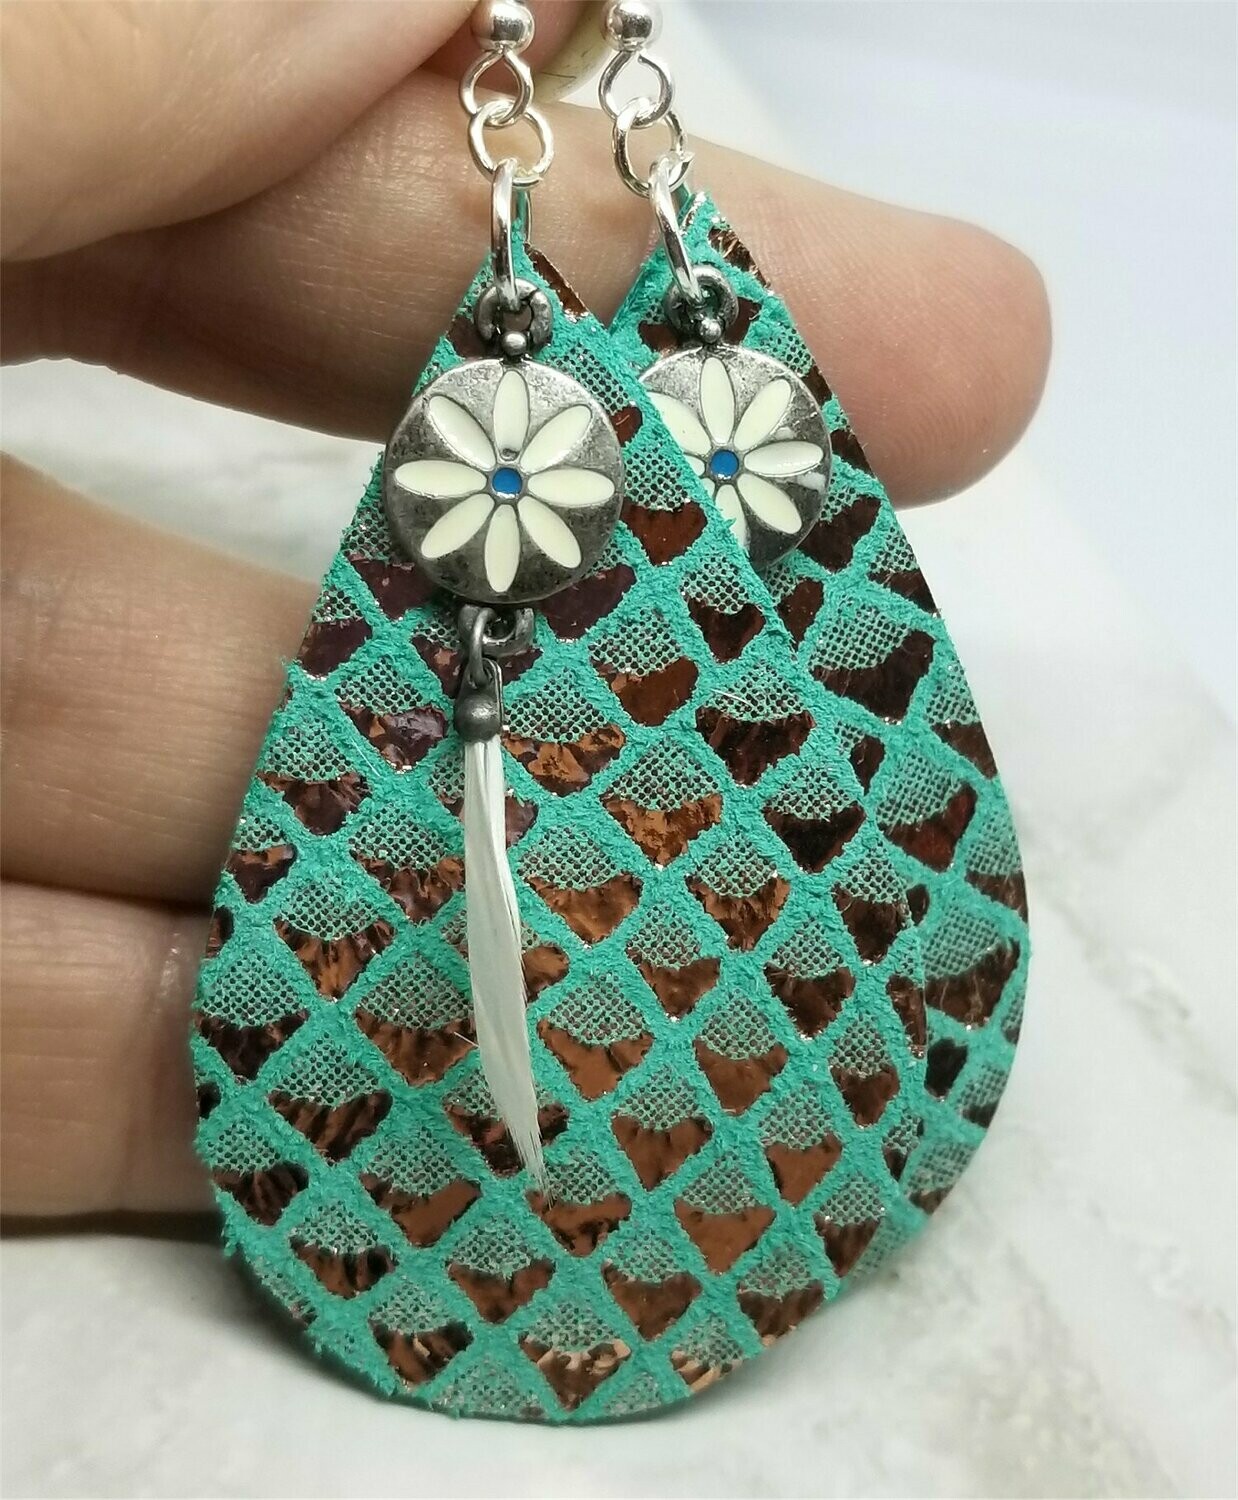 Turquoise Colored Tear Drop Shaped Real Leather Earrings with Metallic Gold Diamond Shapes and Flower Charm with Feather Overlays